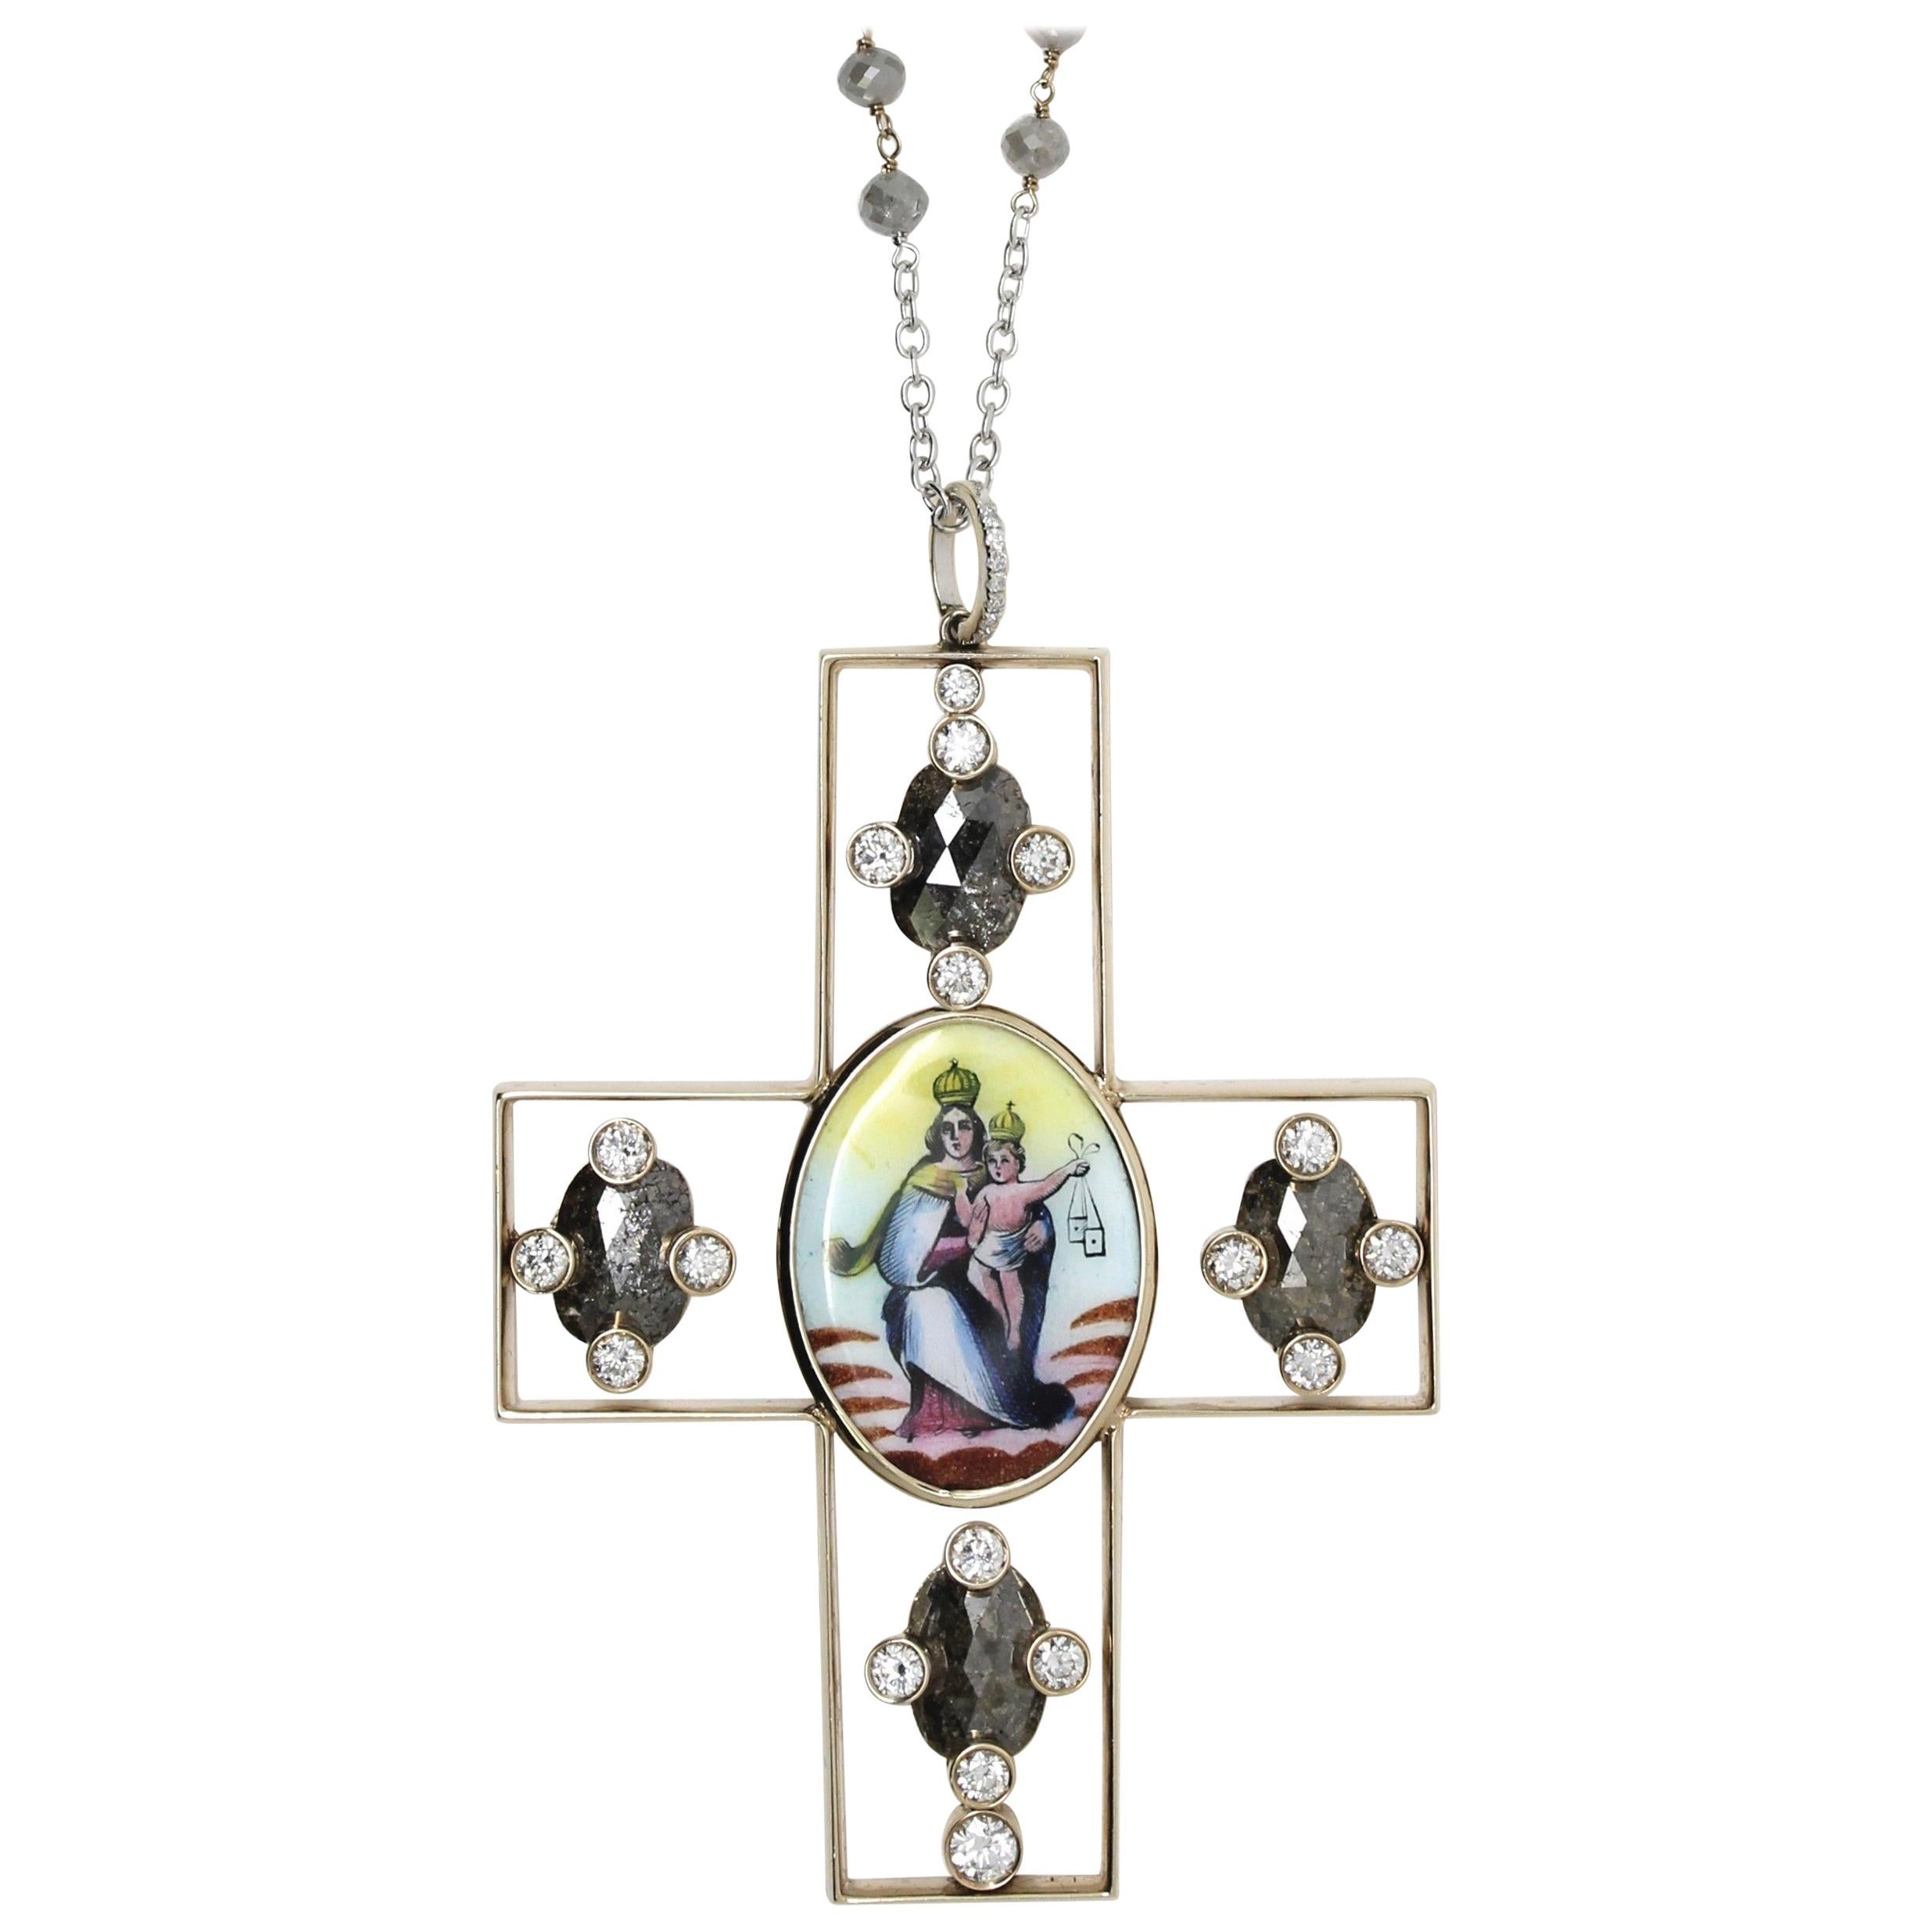 Grey Milky and White Diamond Holy Image Handmade in Italy Cross Pendant Necklace For Sale